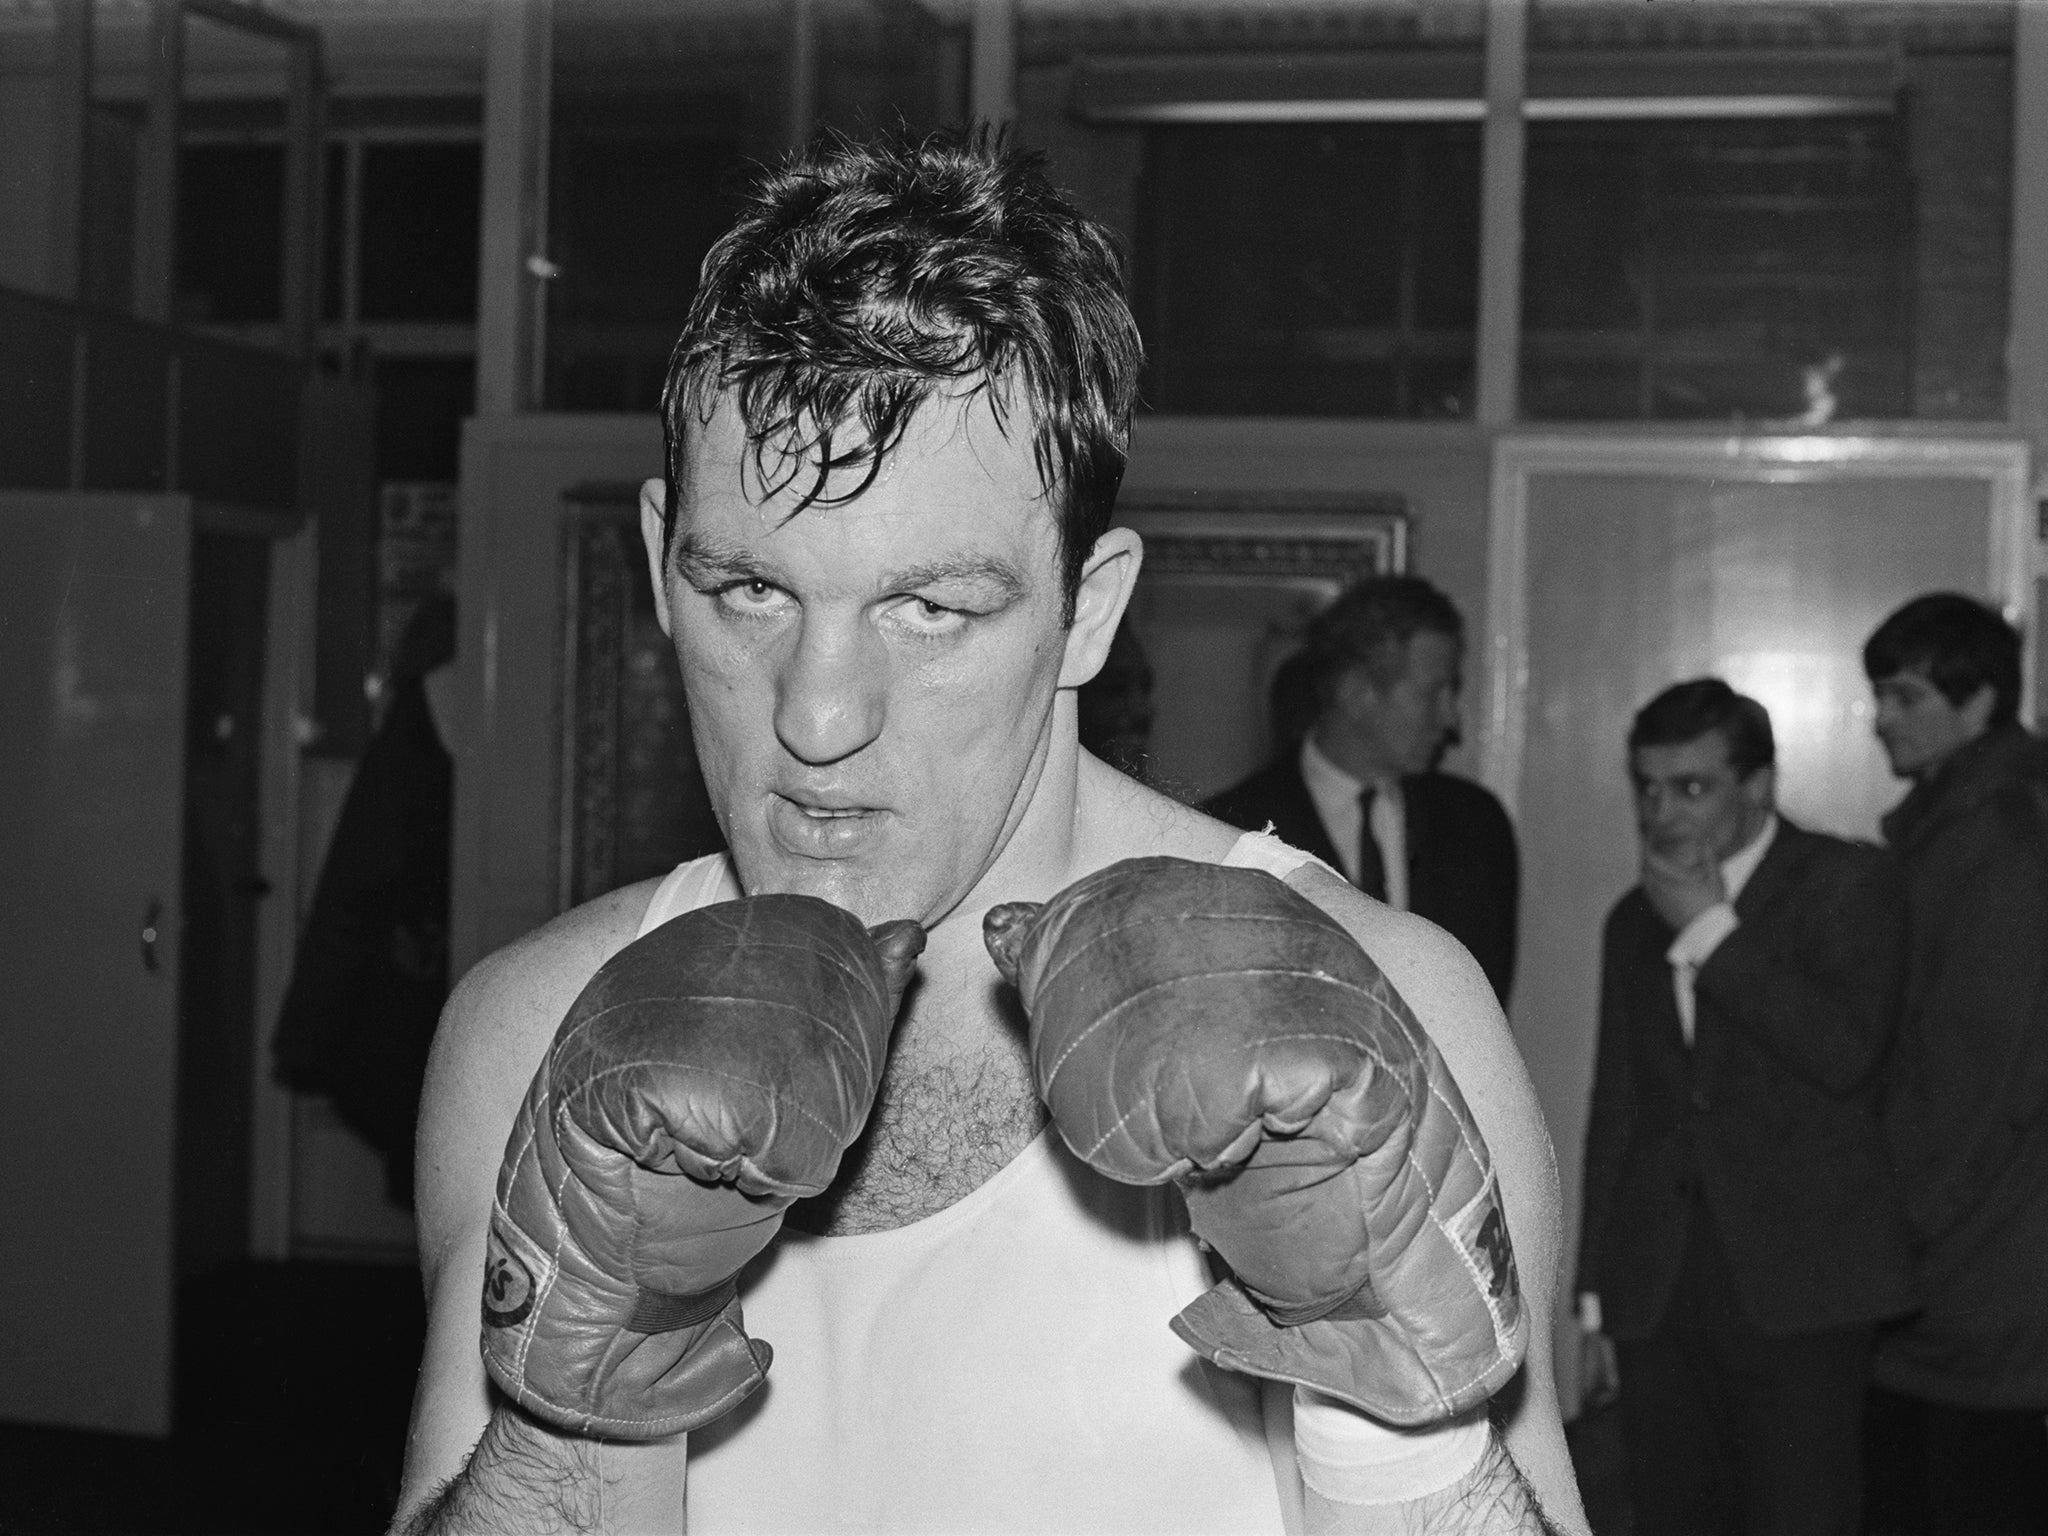 The lantern-jawed boxer (pictured in 1968) was involved in a number of controversial fights during a 16-year professional career